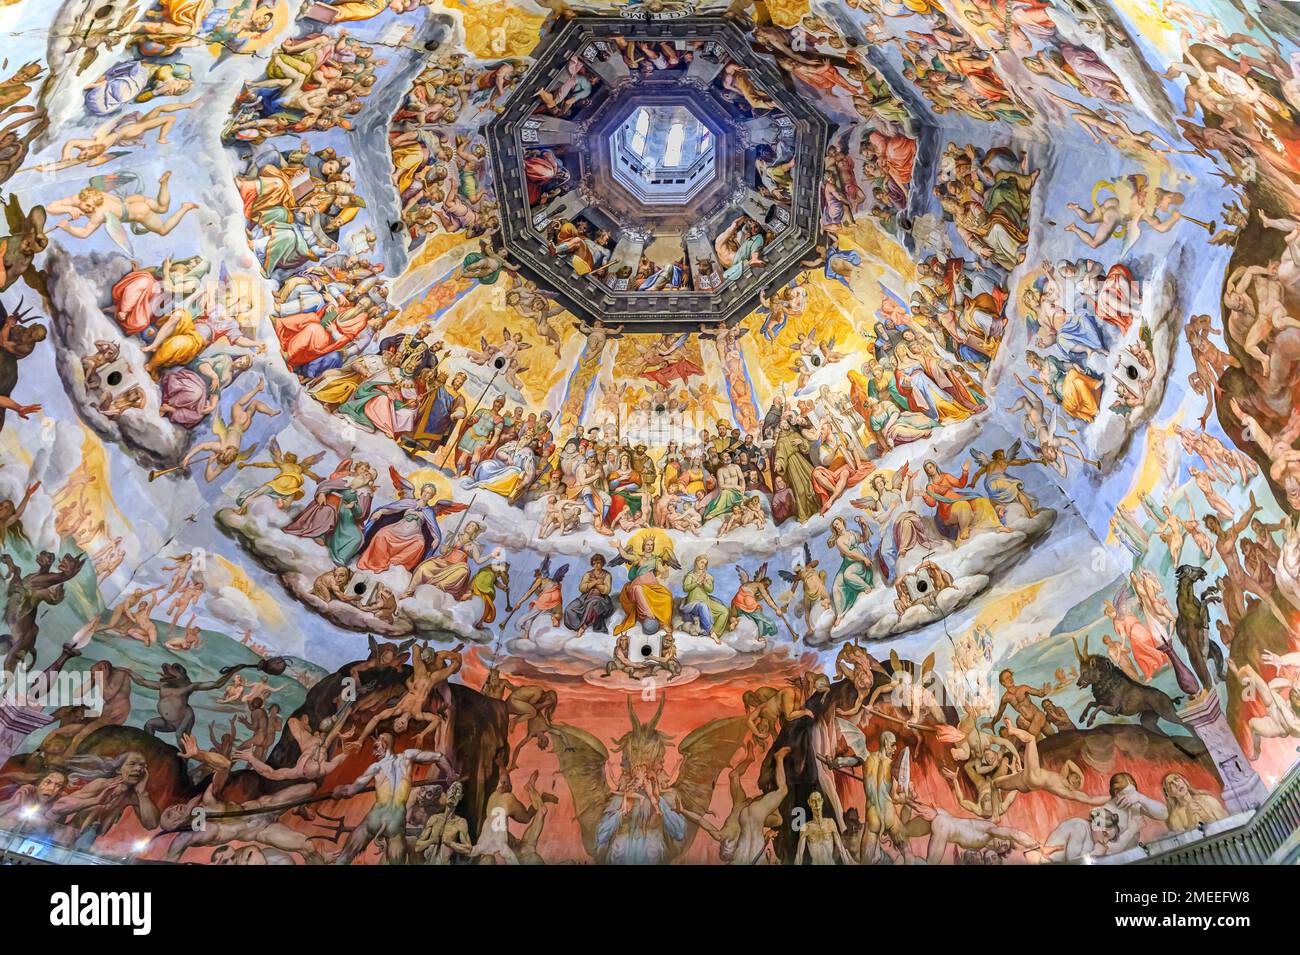 Florence, Italy - June 03, 2022: Judgment Day fresco inside the Brunelleschi dome cupola of the Duomo Cathedral or Cattedrale di Santa Maria del Fiore Stock Photo